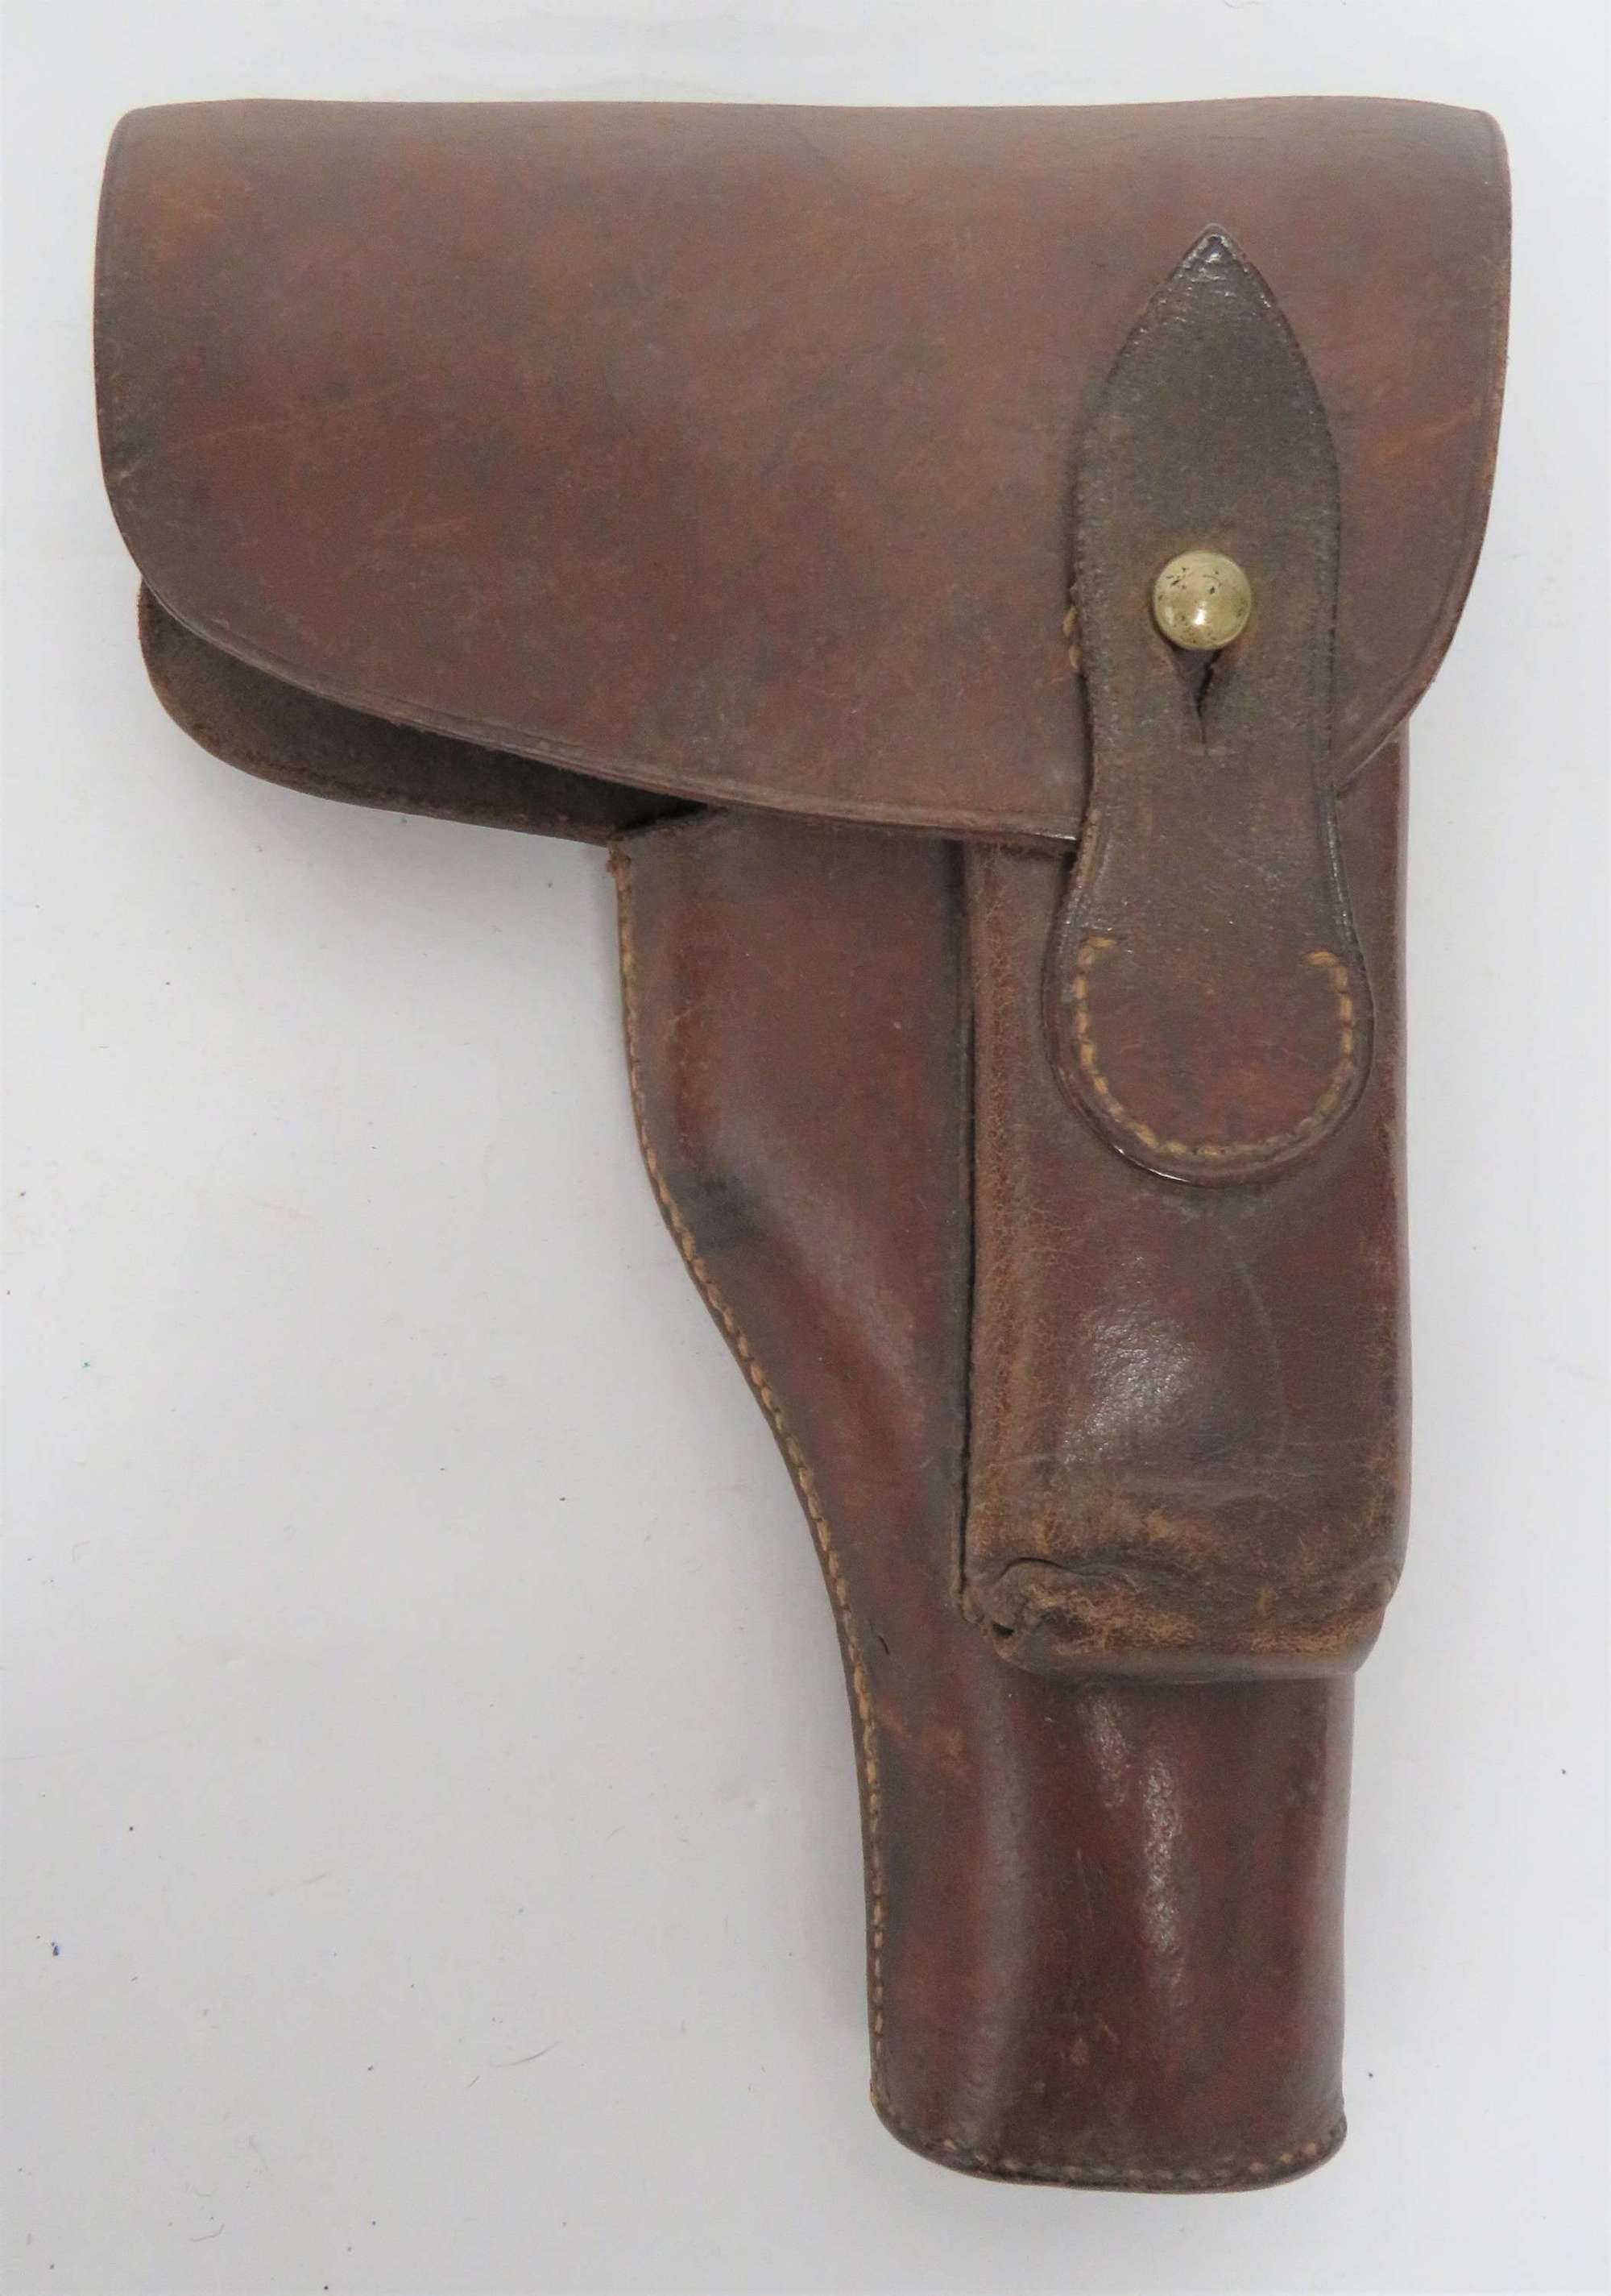 British Private Purchase Colt Automatic Pistol Leather Holster